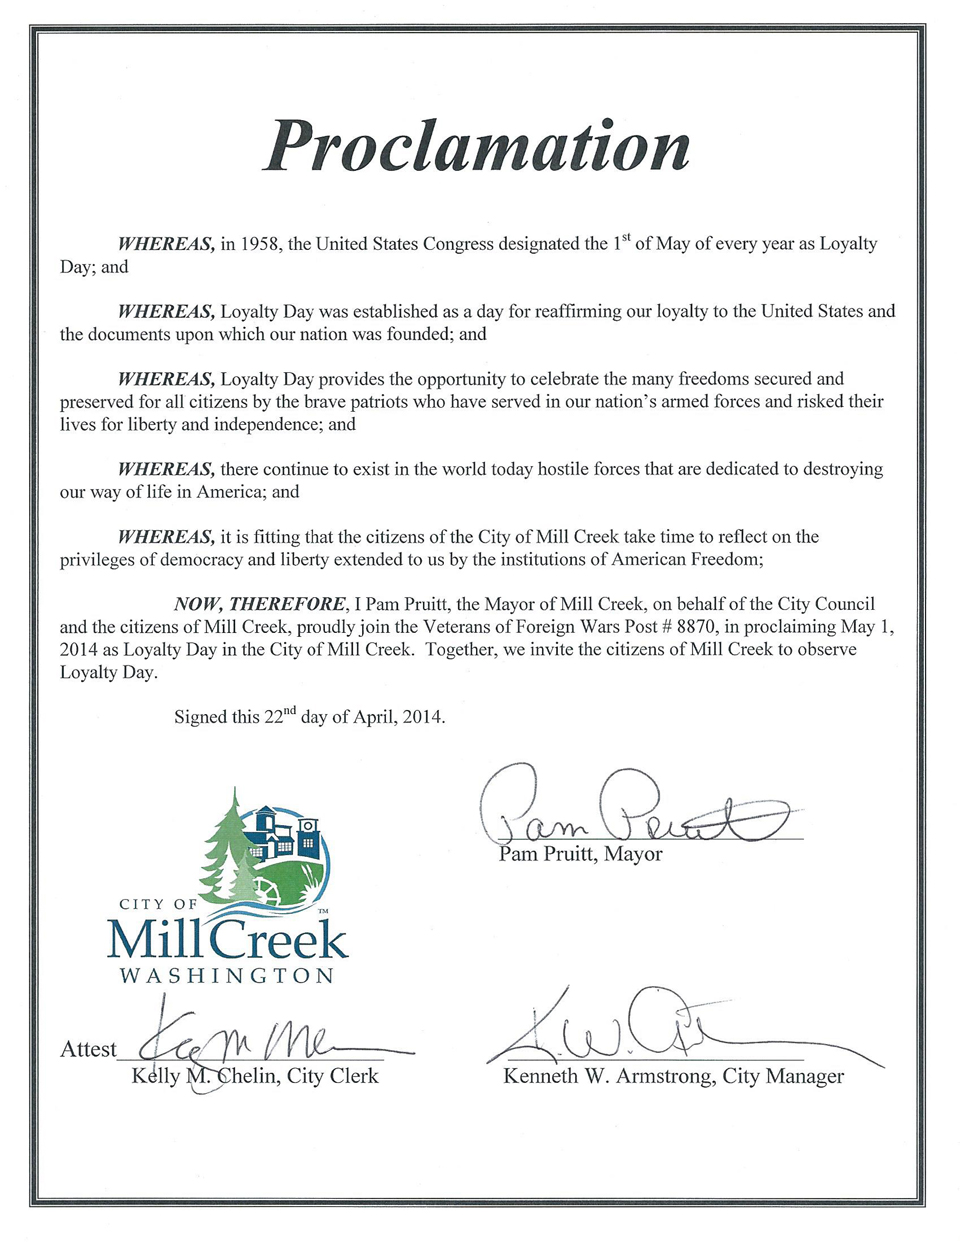 Loyalty Day Proclamation, City of Mill Creek, April 22, 2014